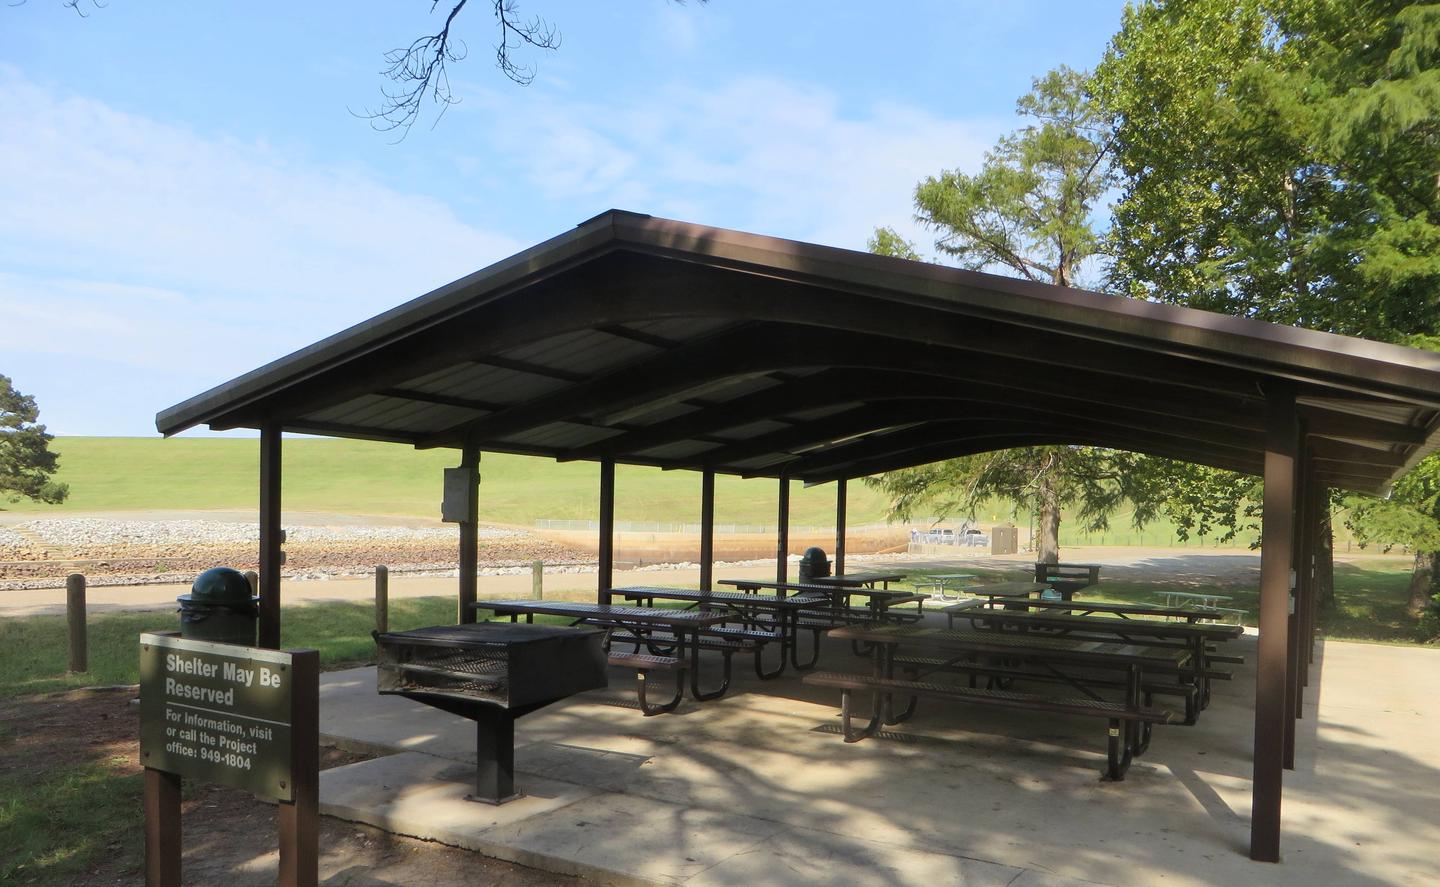 Picnic Shelter Available for RentThis picnic shelter is available in the Tom Merrill Recreation Area.  Pavilion fee is $50 a day and shelter reservations may be made by calling (318) 949-1804, or by reserving on recreation.gov. Pavilion can hold a maximum capacity of 75 people. Located within walking distance of the comfort stations and the outlet channel. 